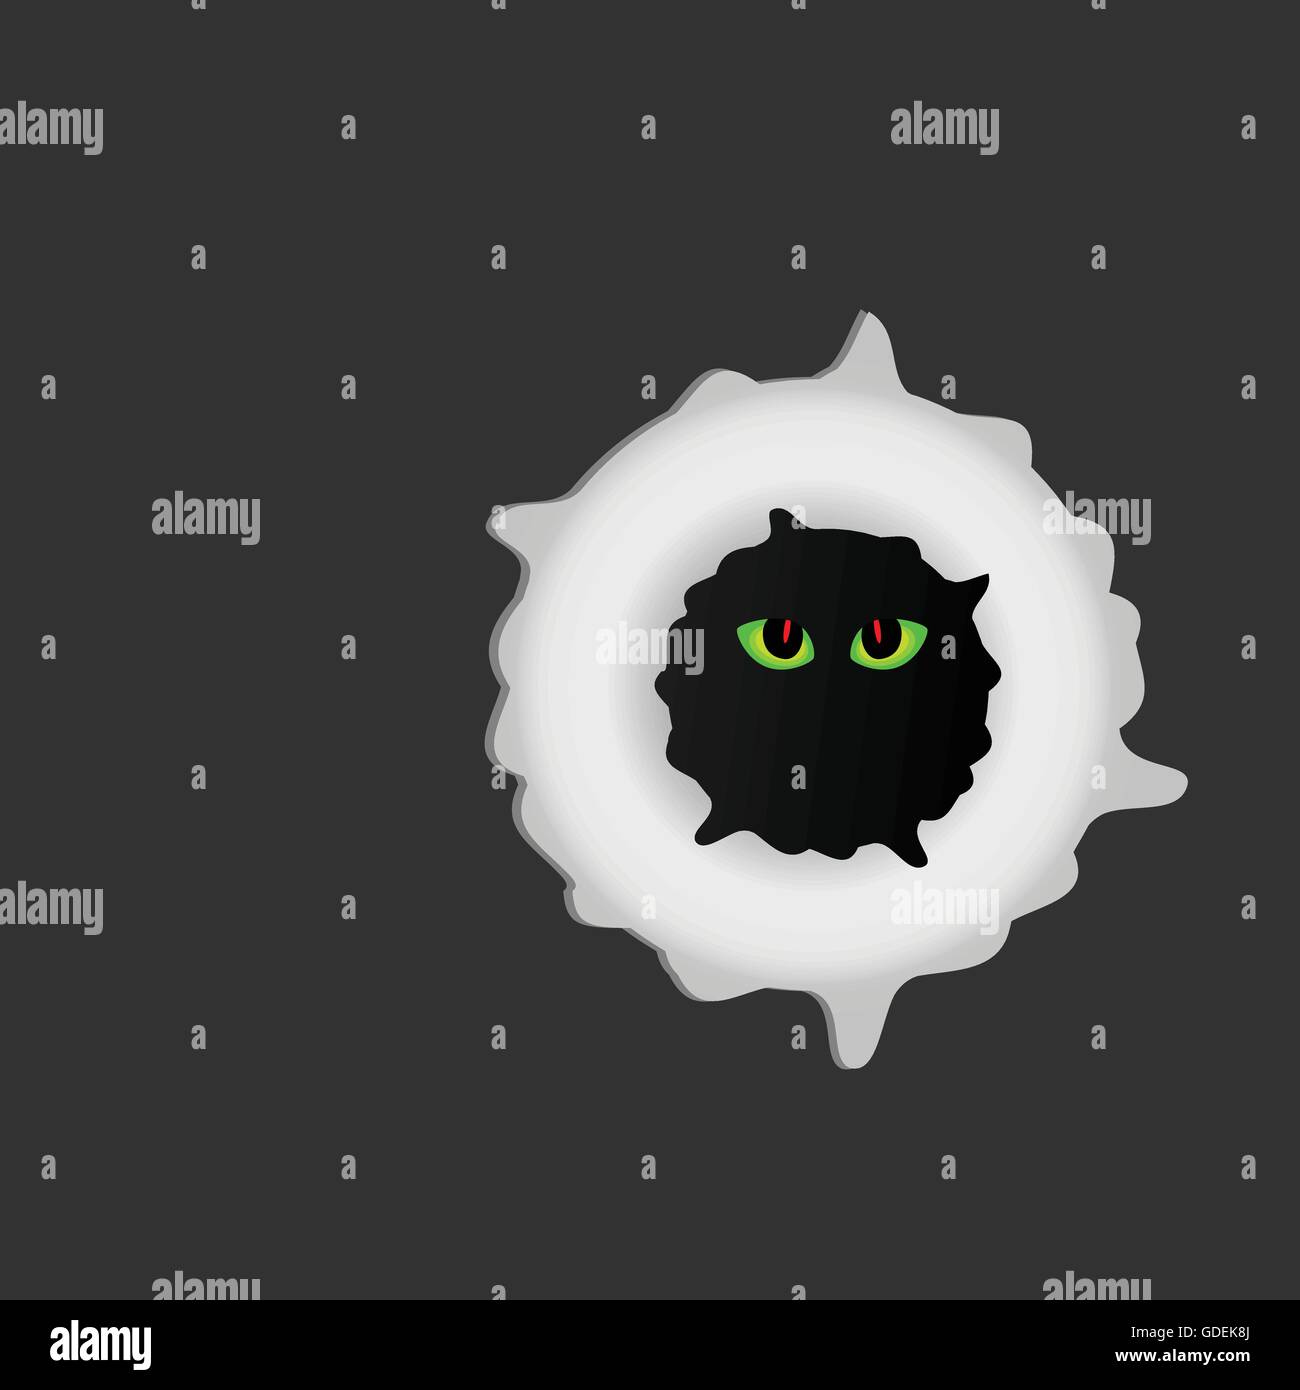 sweet and funny creature vector illustration Stock Vector